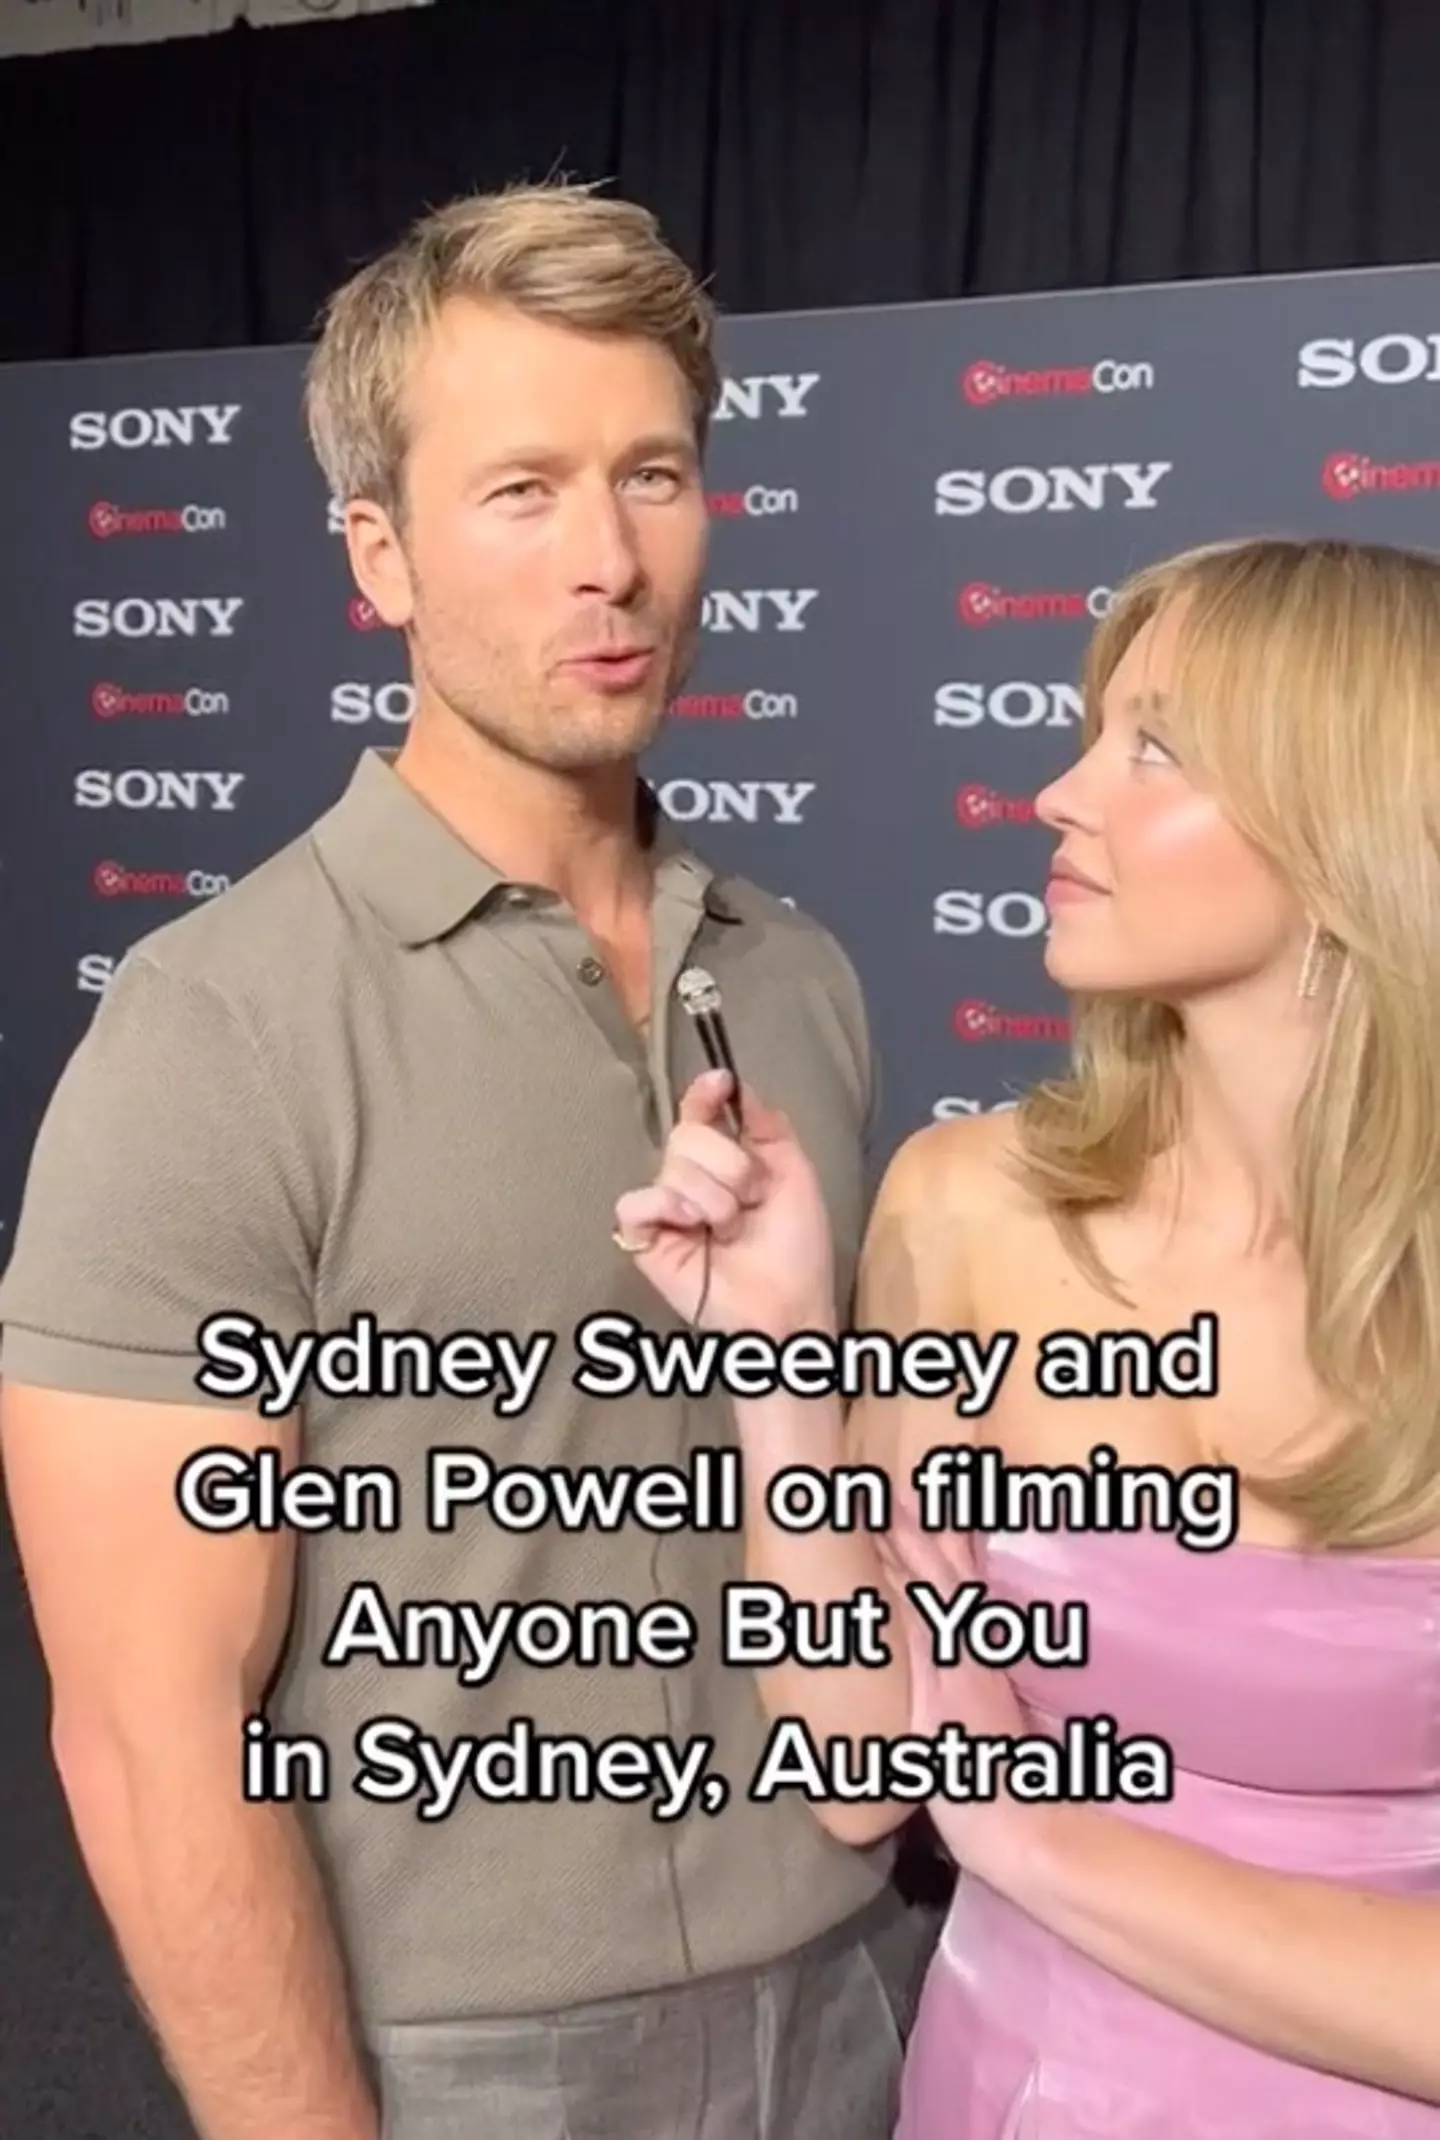 The pair of Hollywood stars have filmed romantic comedy Anyone But You in Australia.